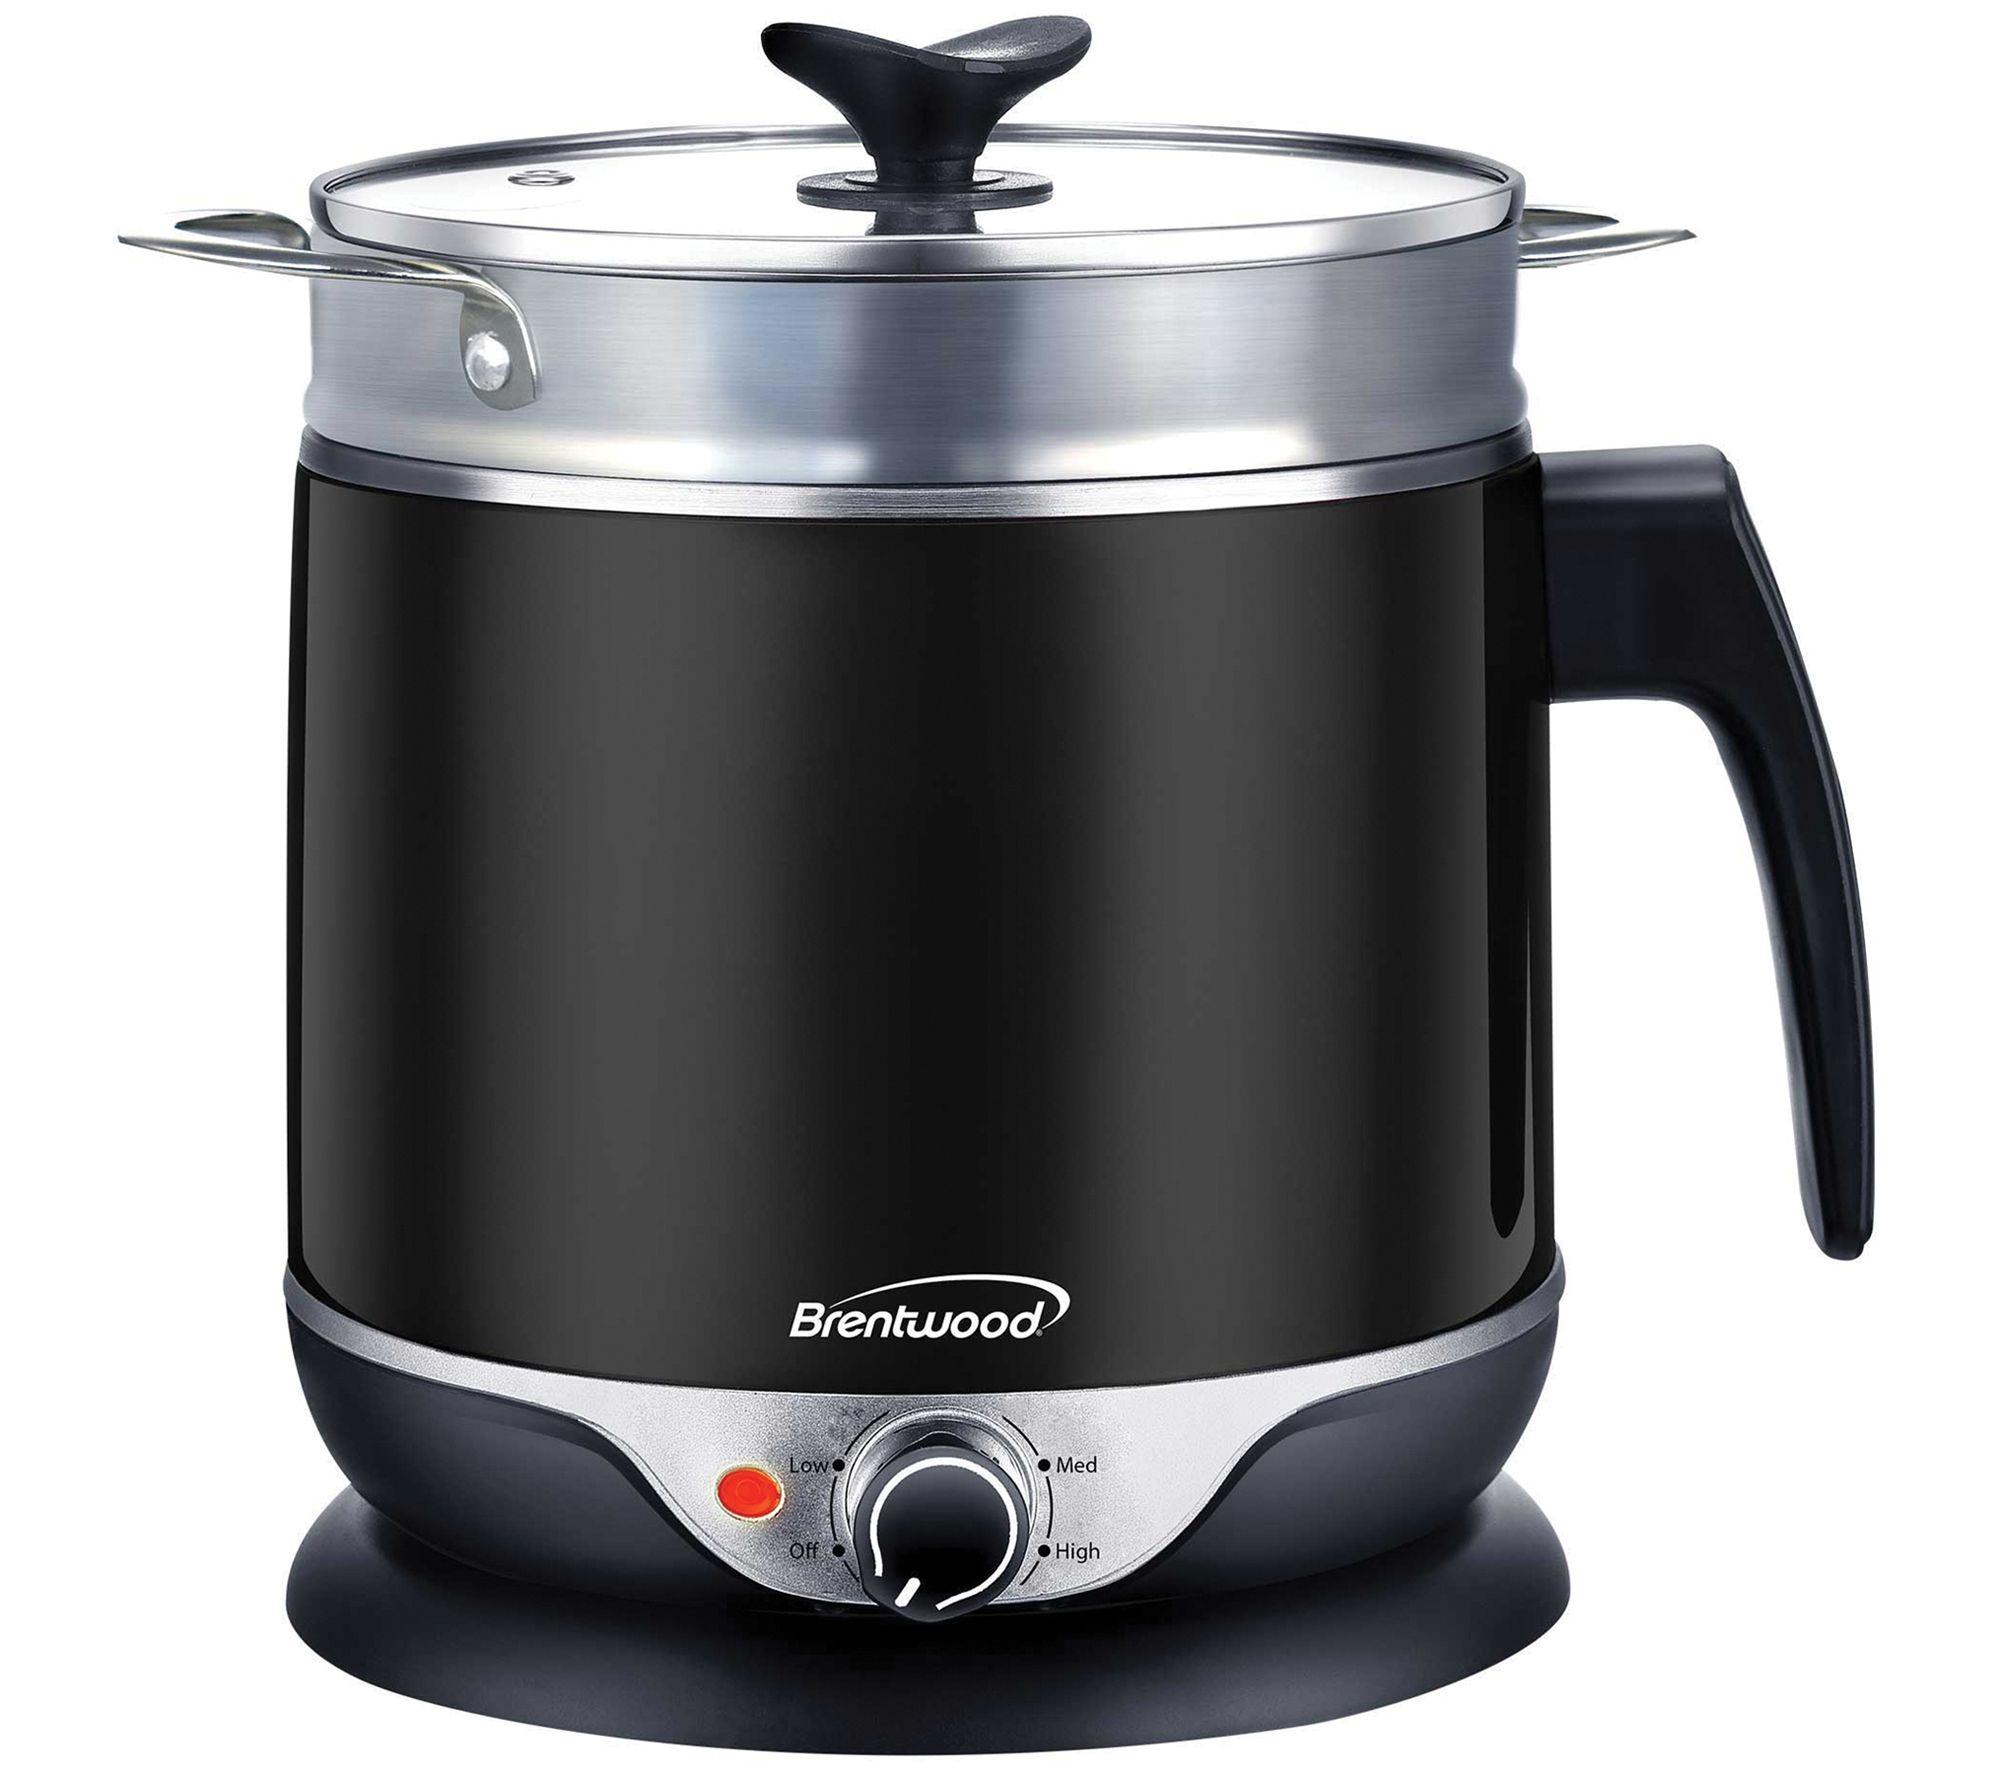 Brentwood Stainless Steel 1.6 Quart Electric Hot Pot Cooker And